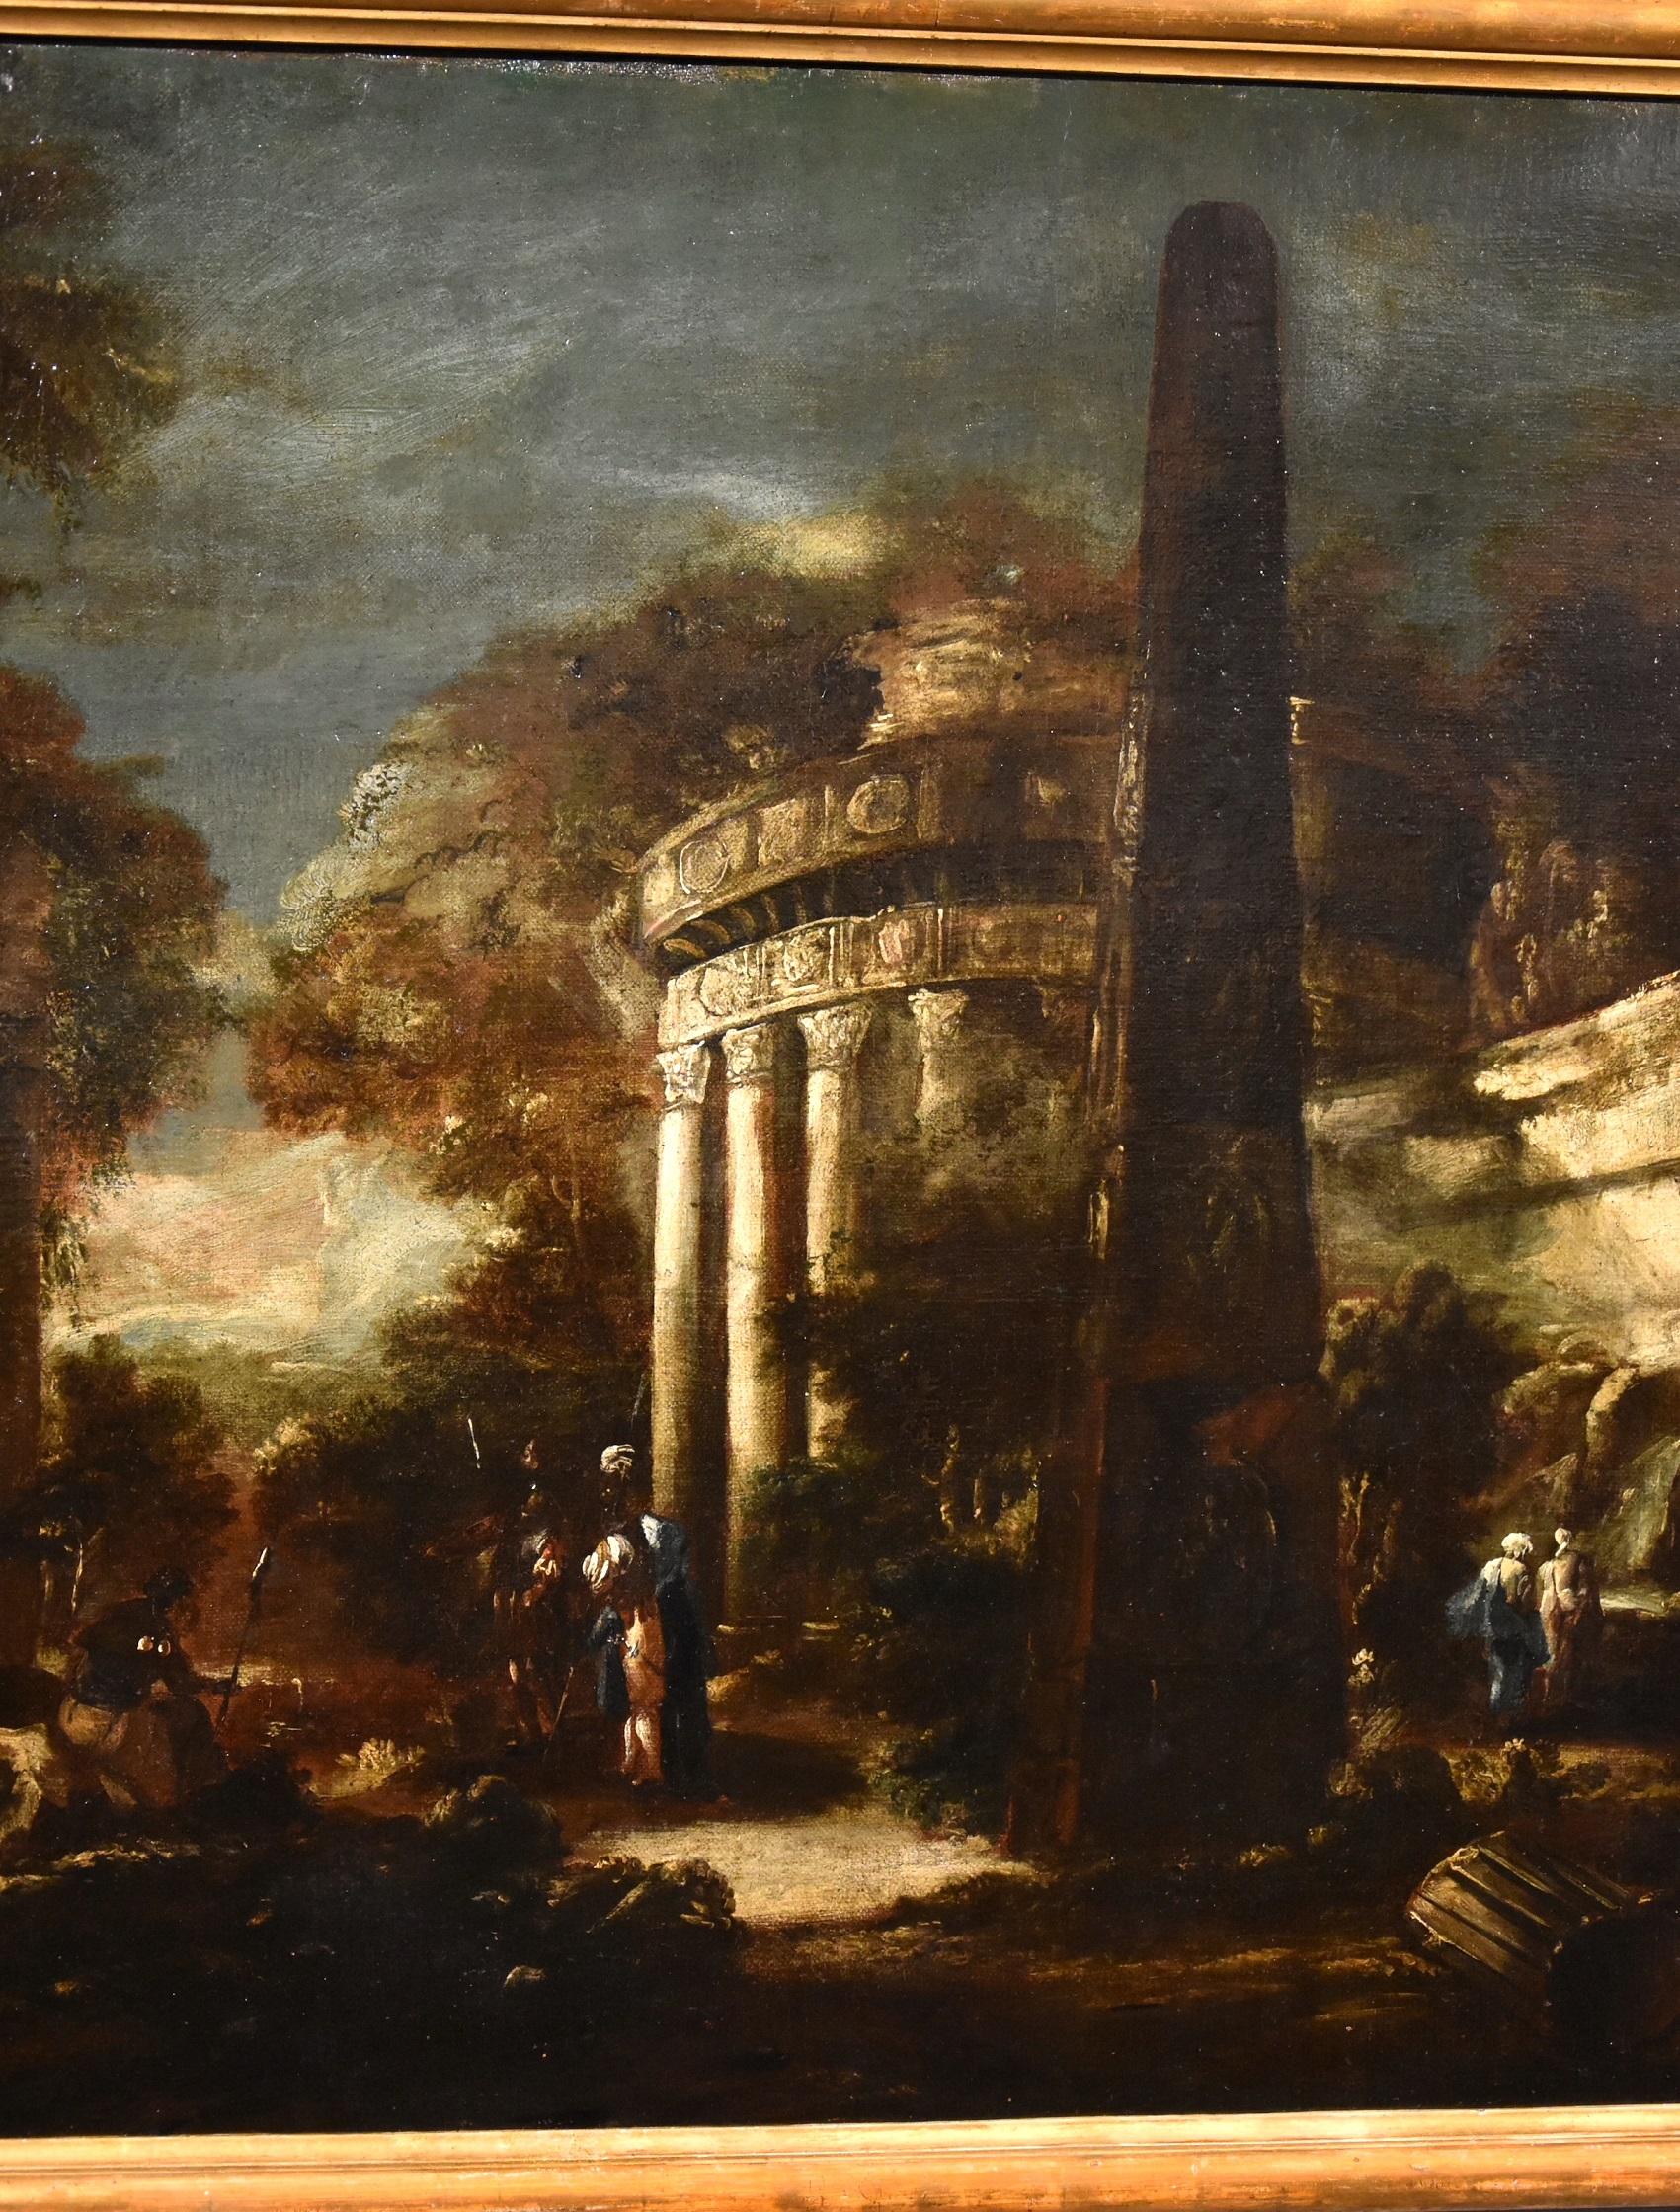 Caprice Architectural Landscape Paint Oil on canvas Old master 18th Century Art  4